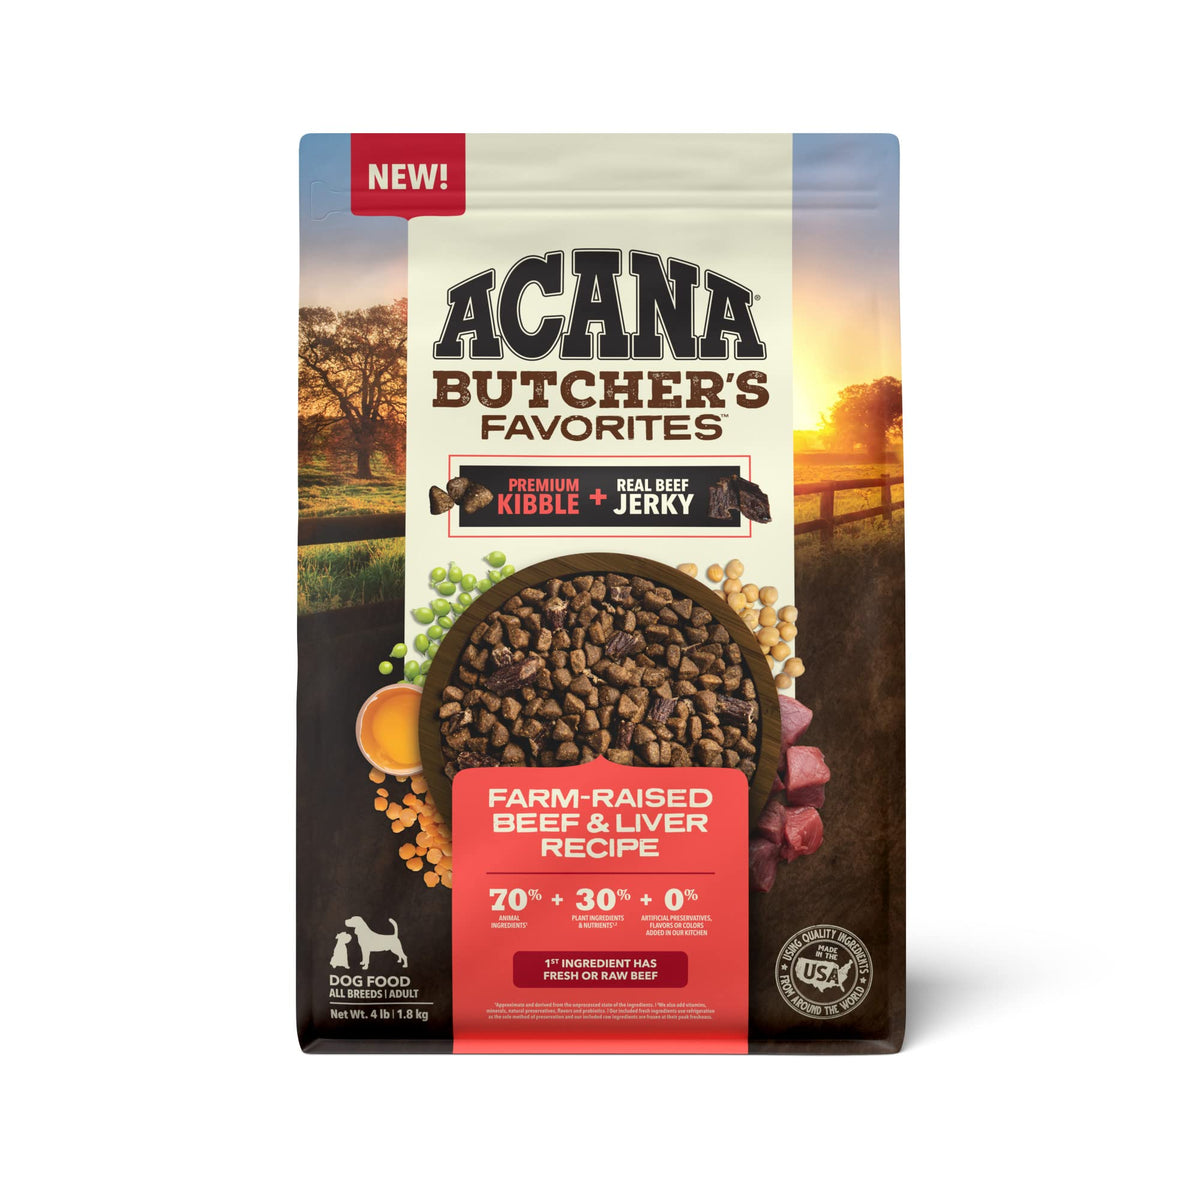 ACANA Butcher's Favorites Dry Dog Food, Farm-Raised Beef & Liver Recipe, Dry Kibble and Beef Jerky Pieces, 4lb